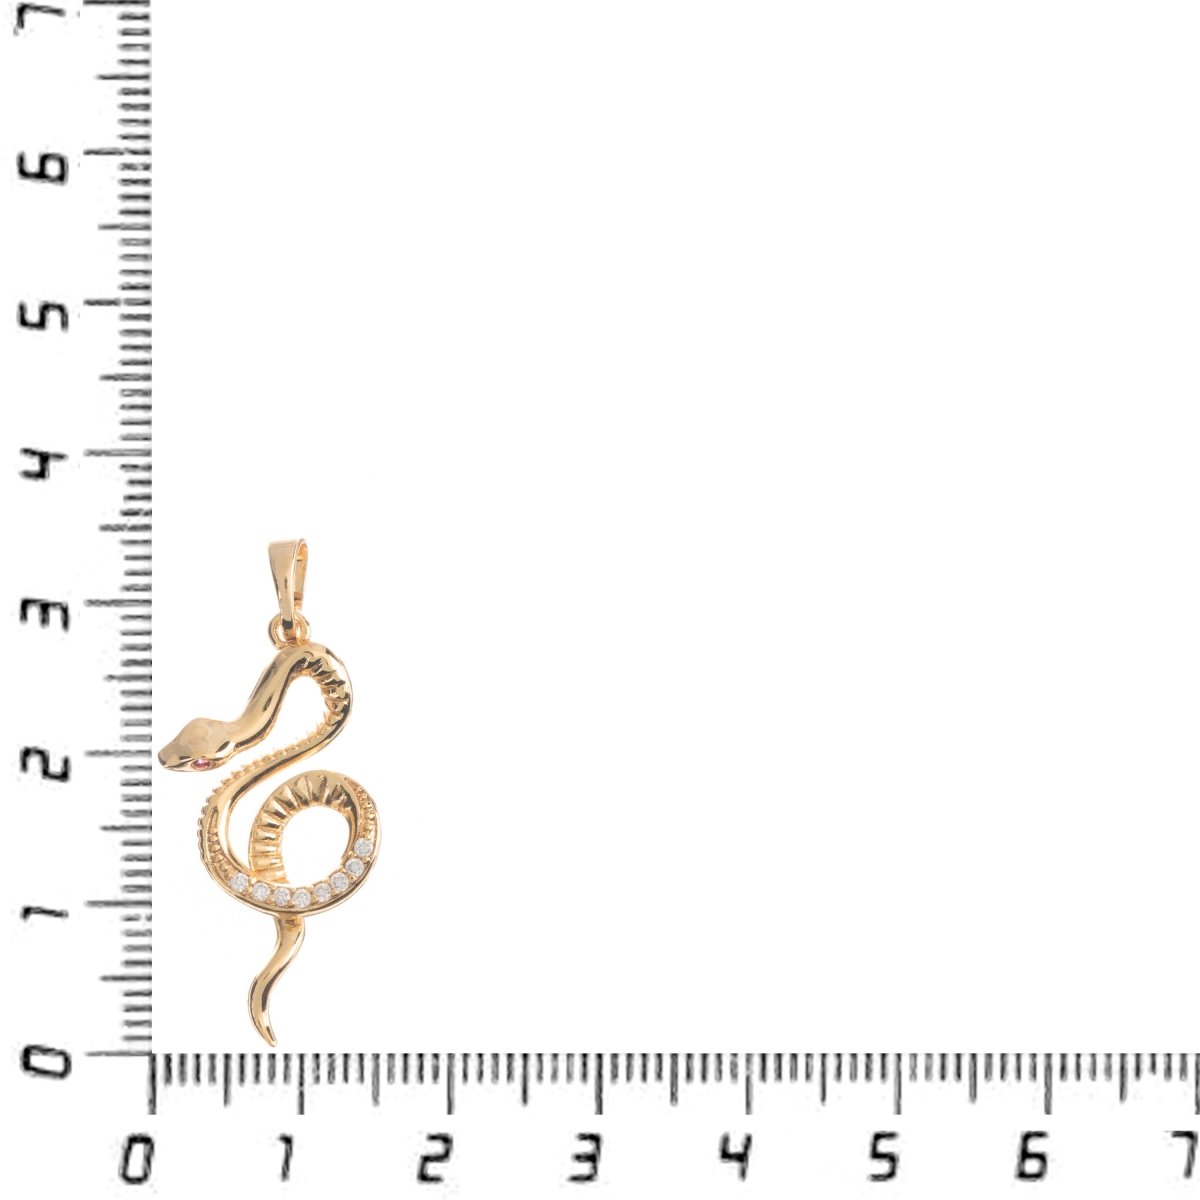 Snake charm, Gold Filled Snake Charm, Reptile Animal, Serpent Charm Necklace Pendant Bead Finding for Jewelry Making Supply H-703 - DLUXCA